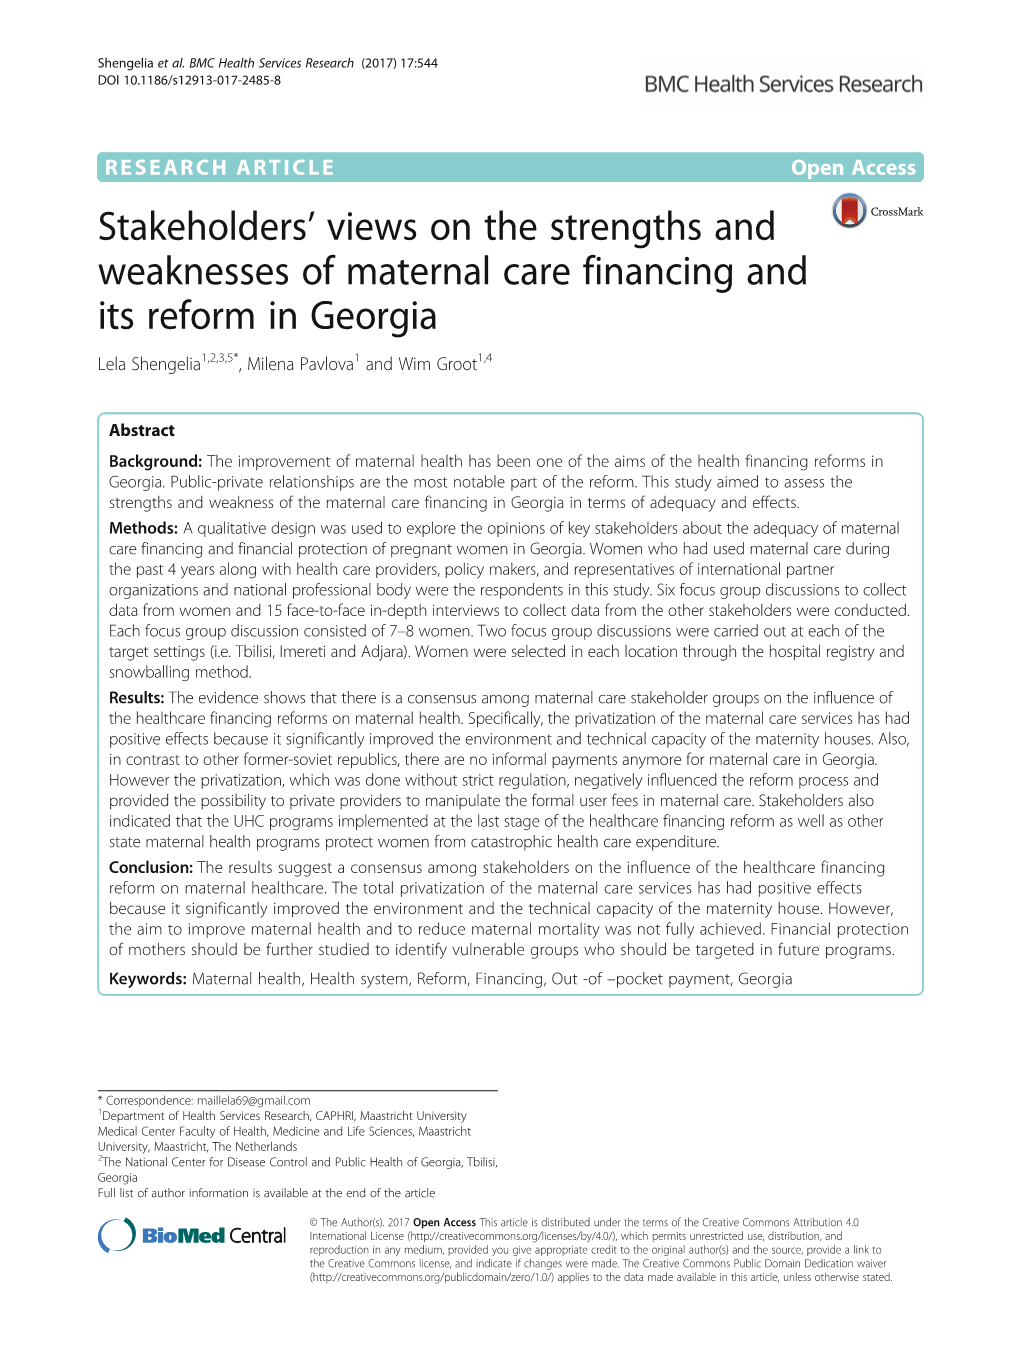 Stakeholders' Views on the Strengths and Weaknesses of Maternal Care